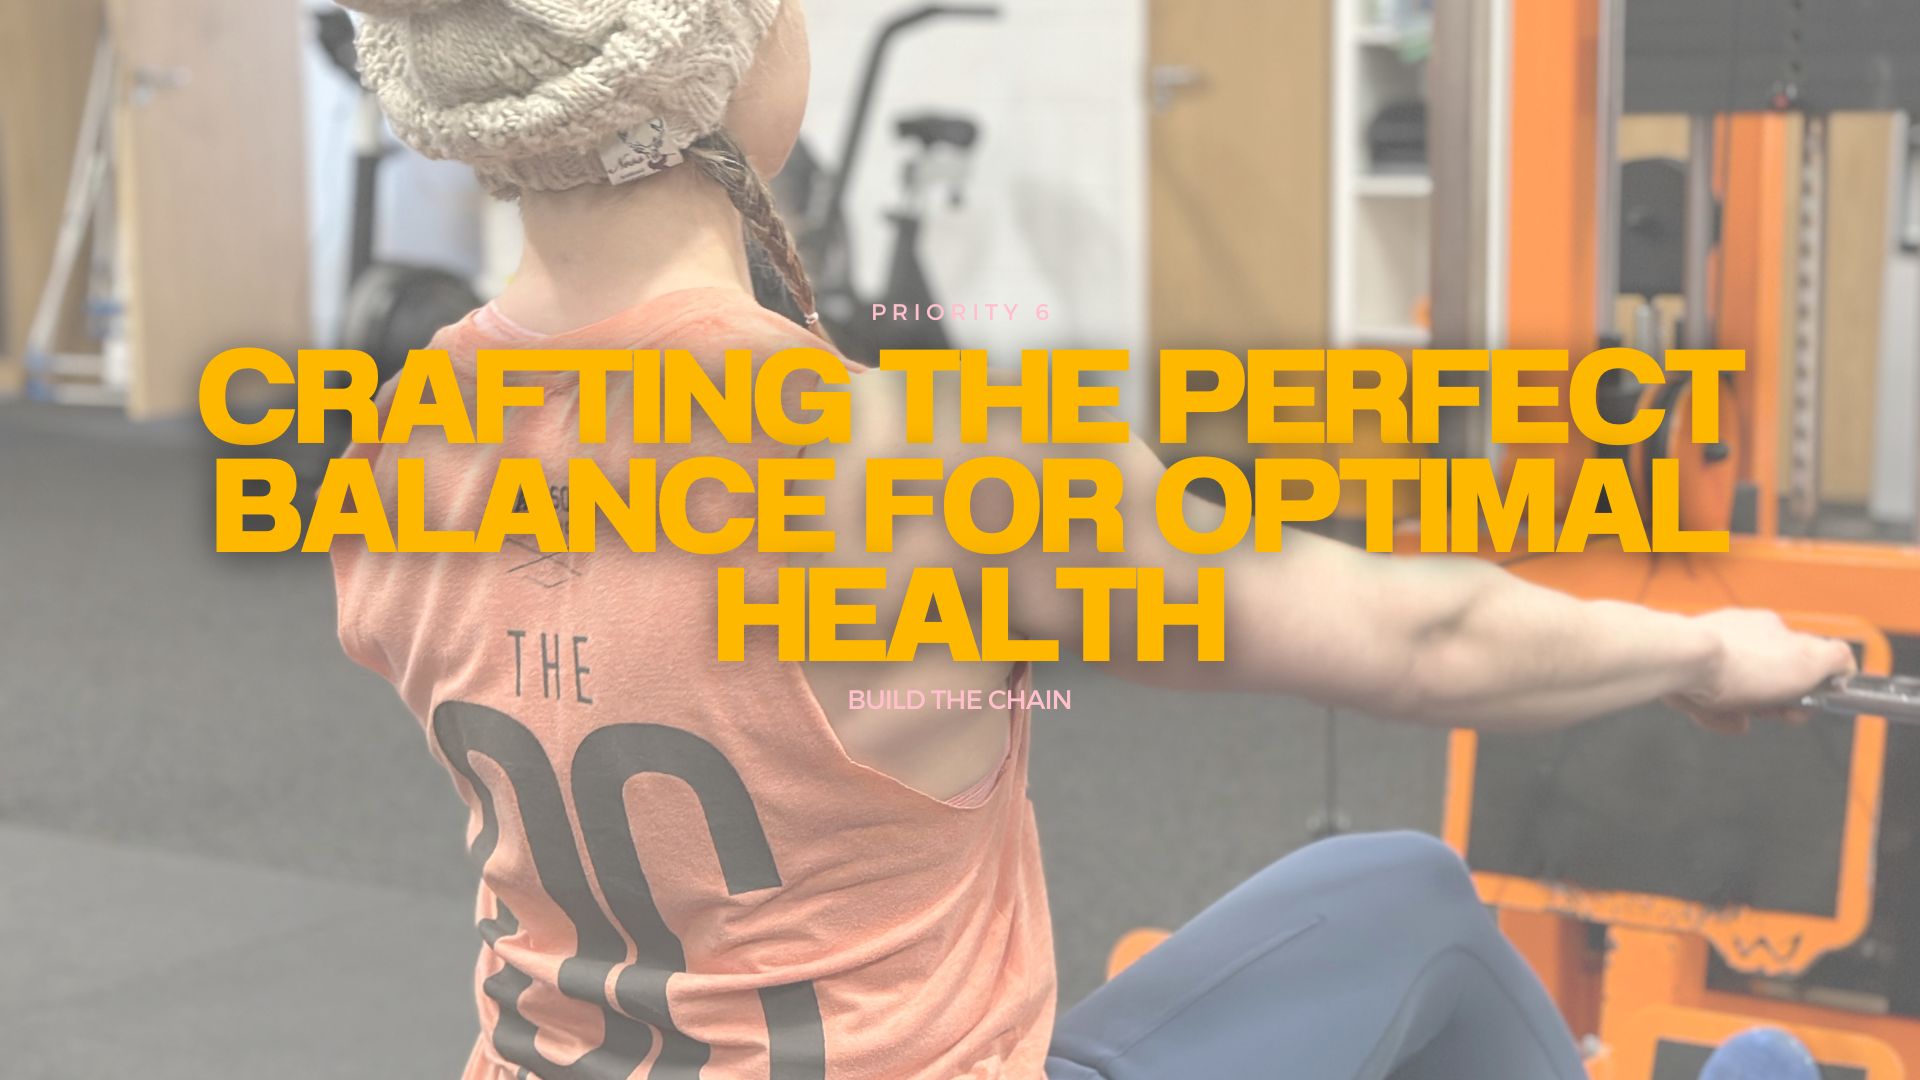 Nutrition and Exercise: Crafting the Perfect Balance for Optimal Health